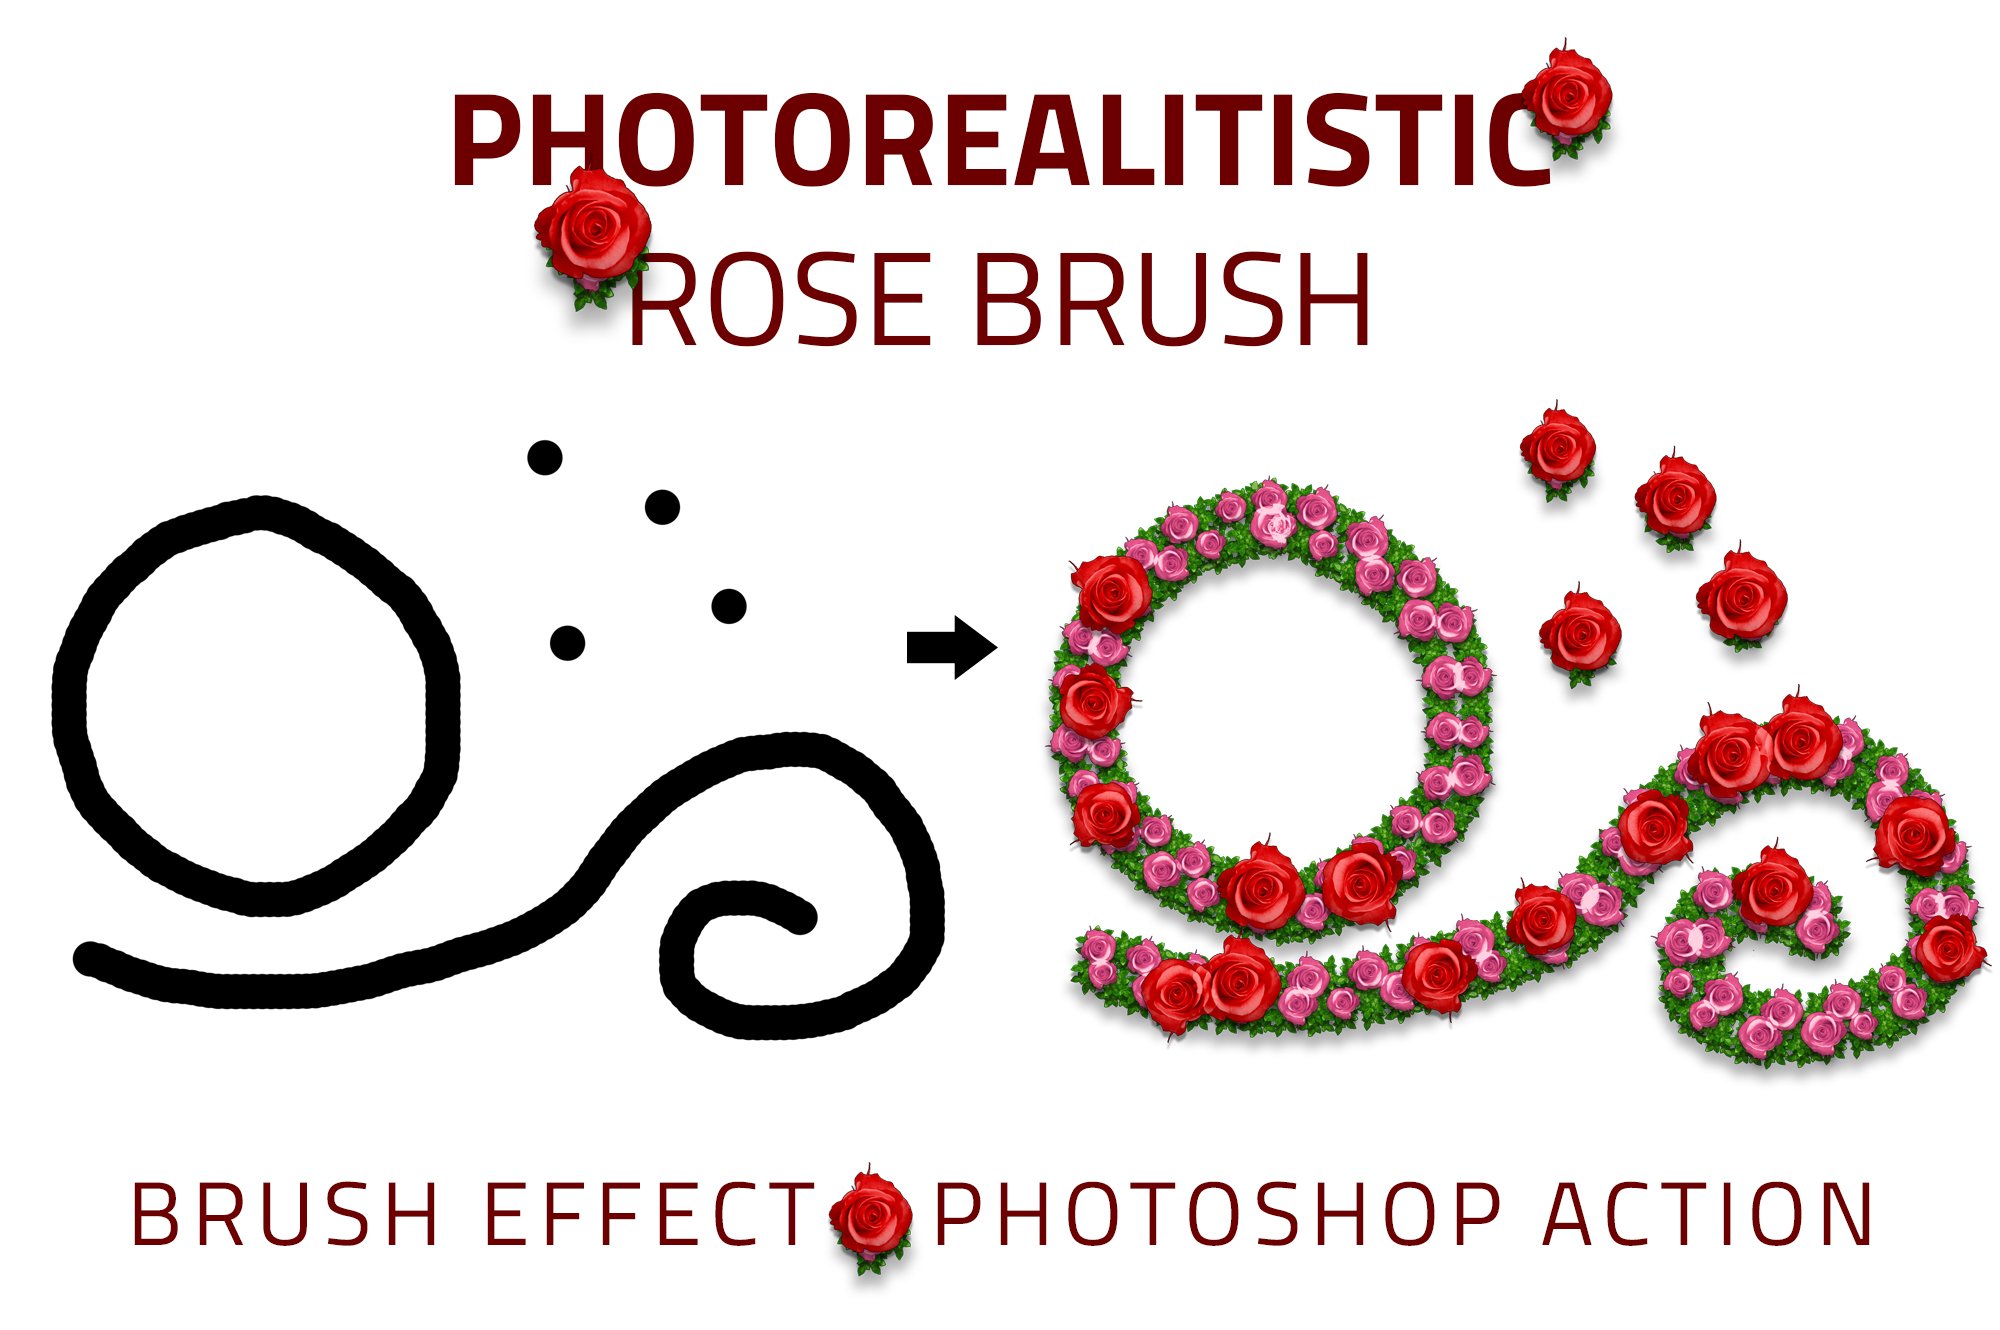 Rose Brush Photo Effectpreview image.